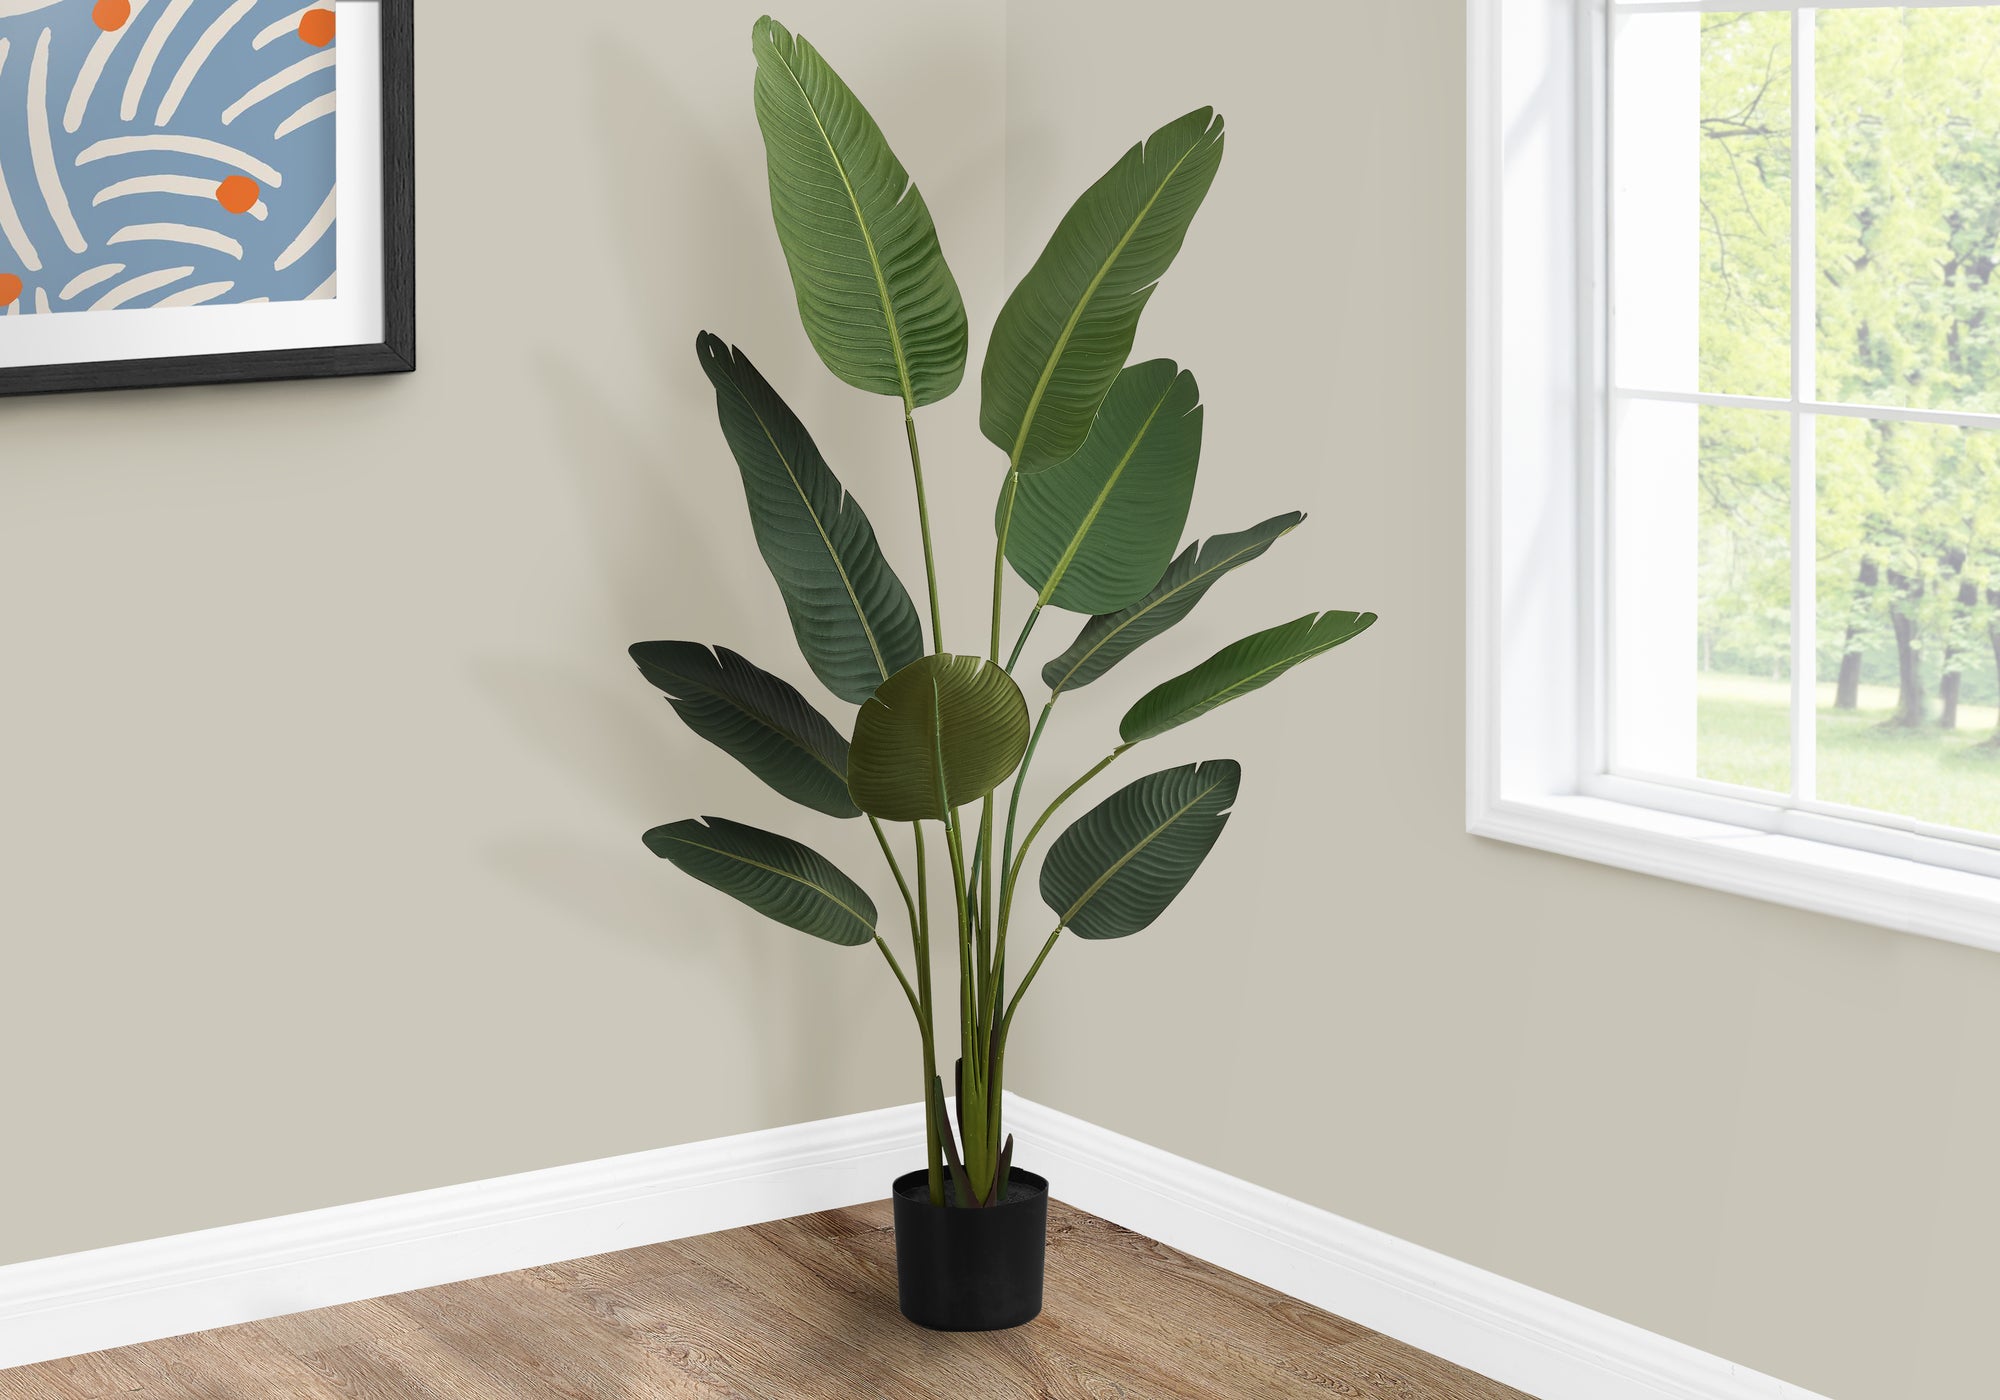 MN-629570    Artificial Plant, 60" Tall, Bird Of Paradise Tree, Indoor, Faux, Fake, Floor, Greenery, Potted, Decorative, Green Leaves, Black Pot